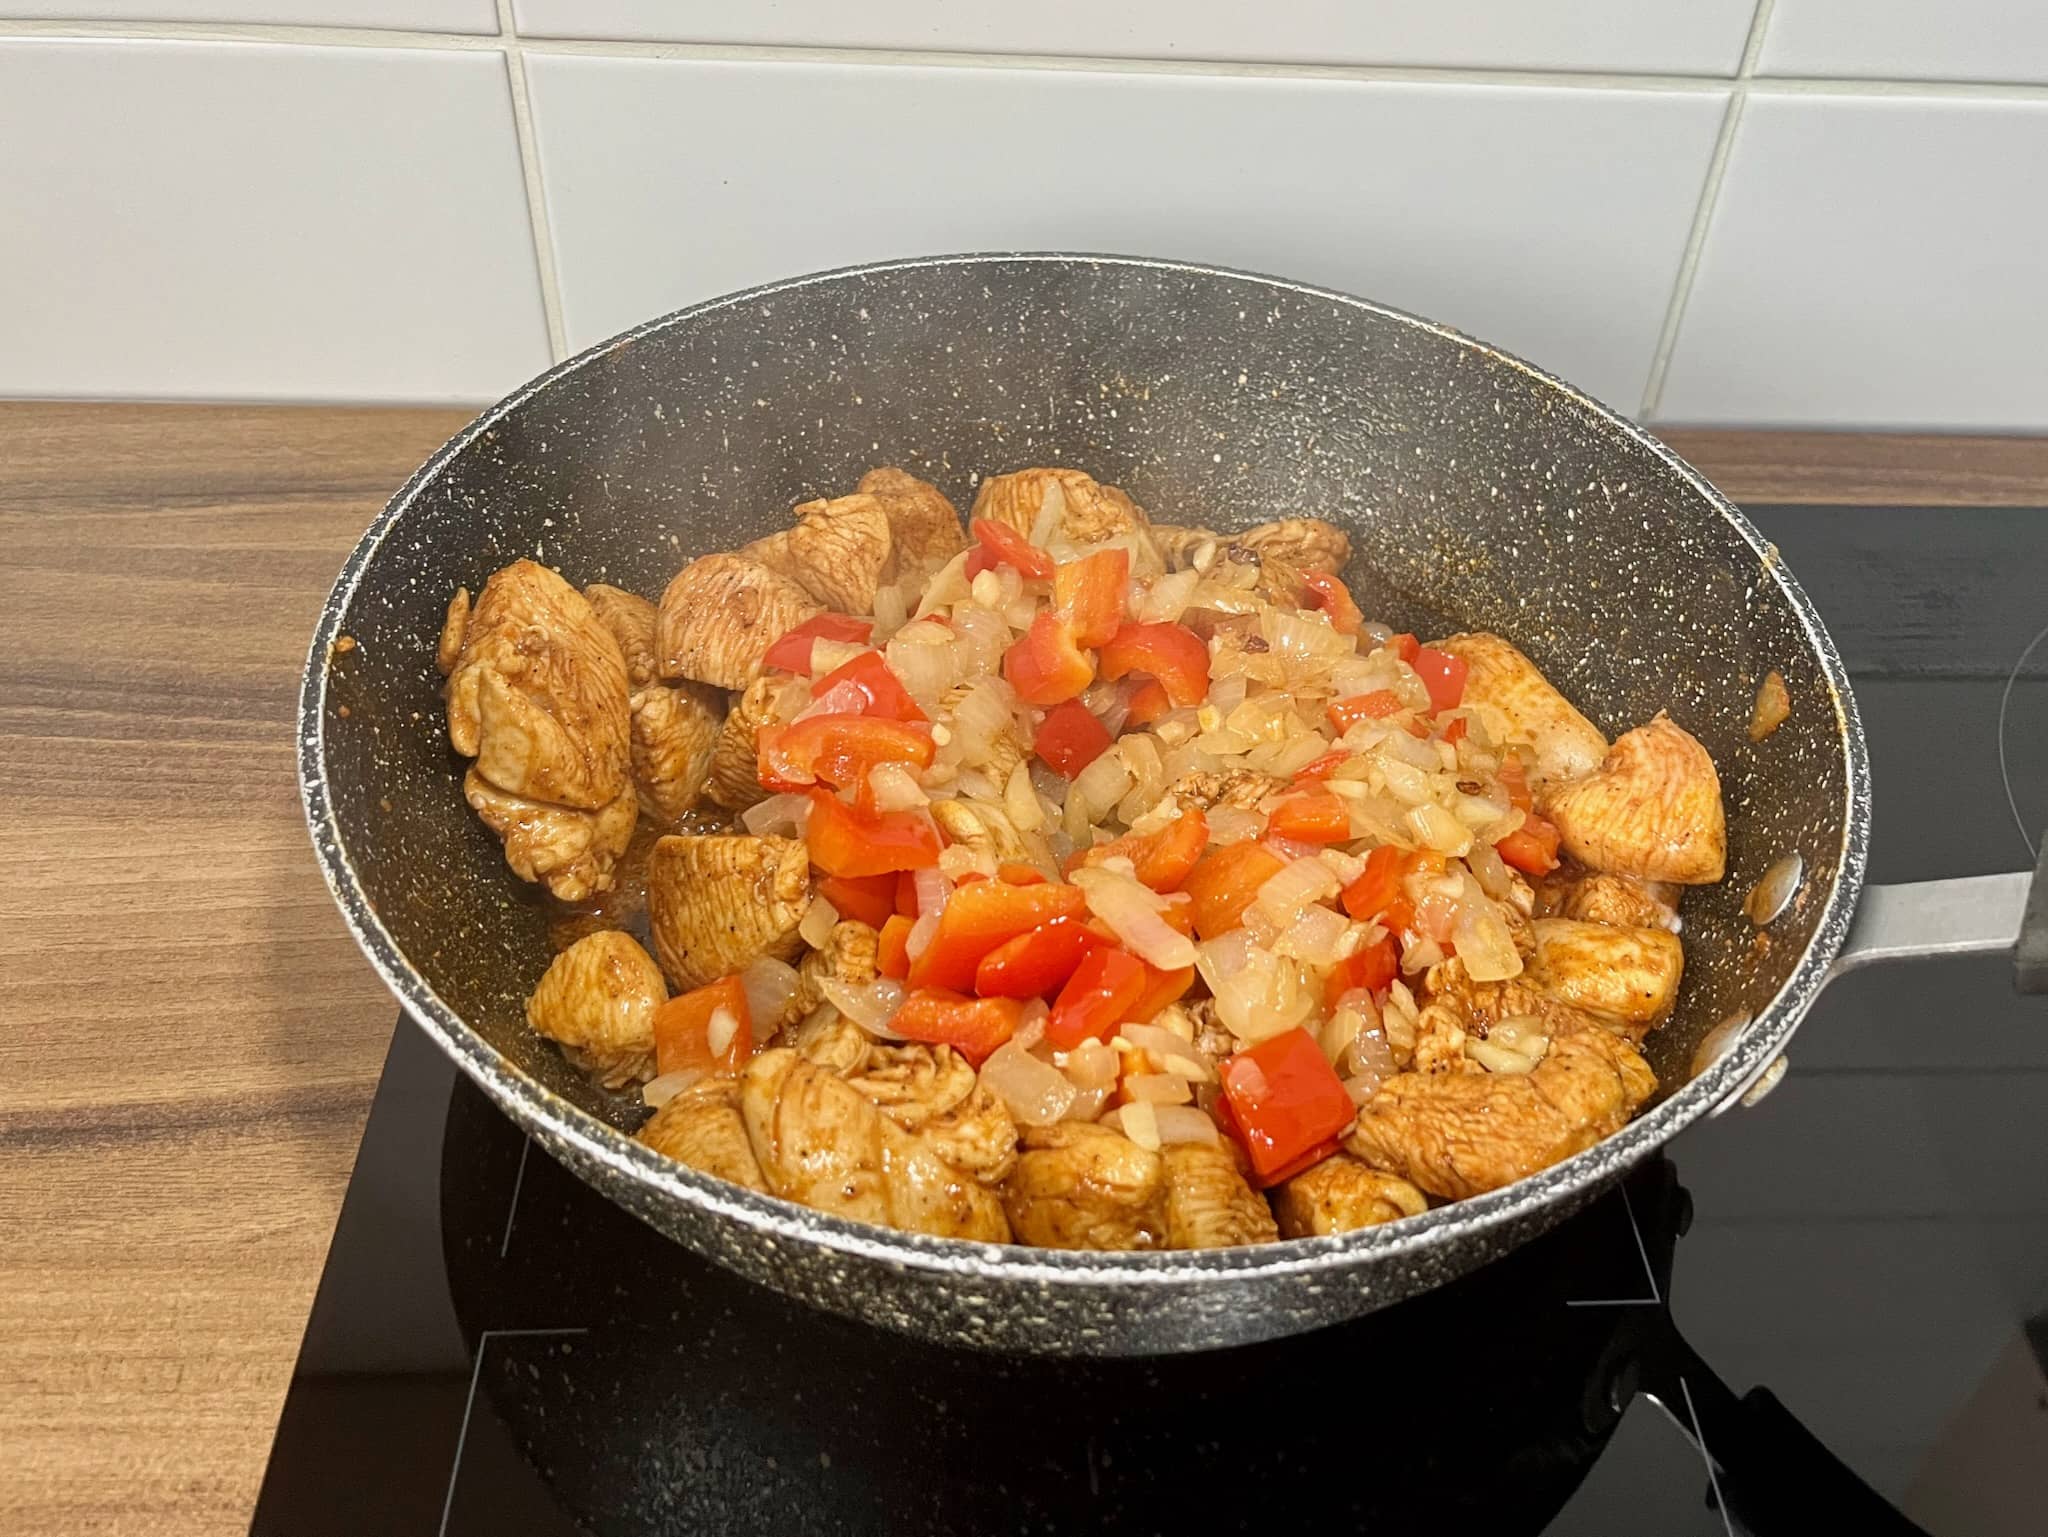 Diced chicken frying in a pan with onion and pepper mix